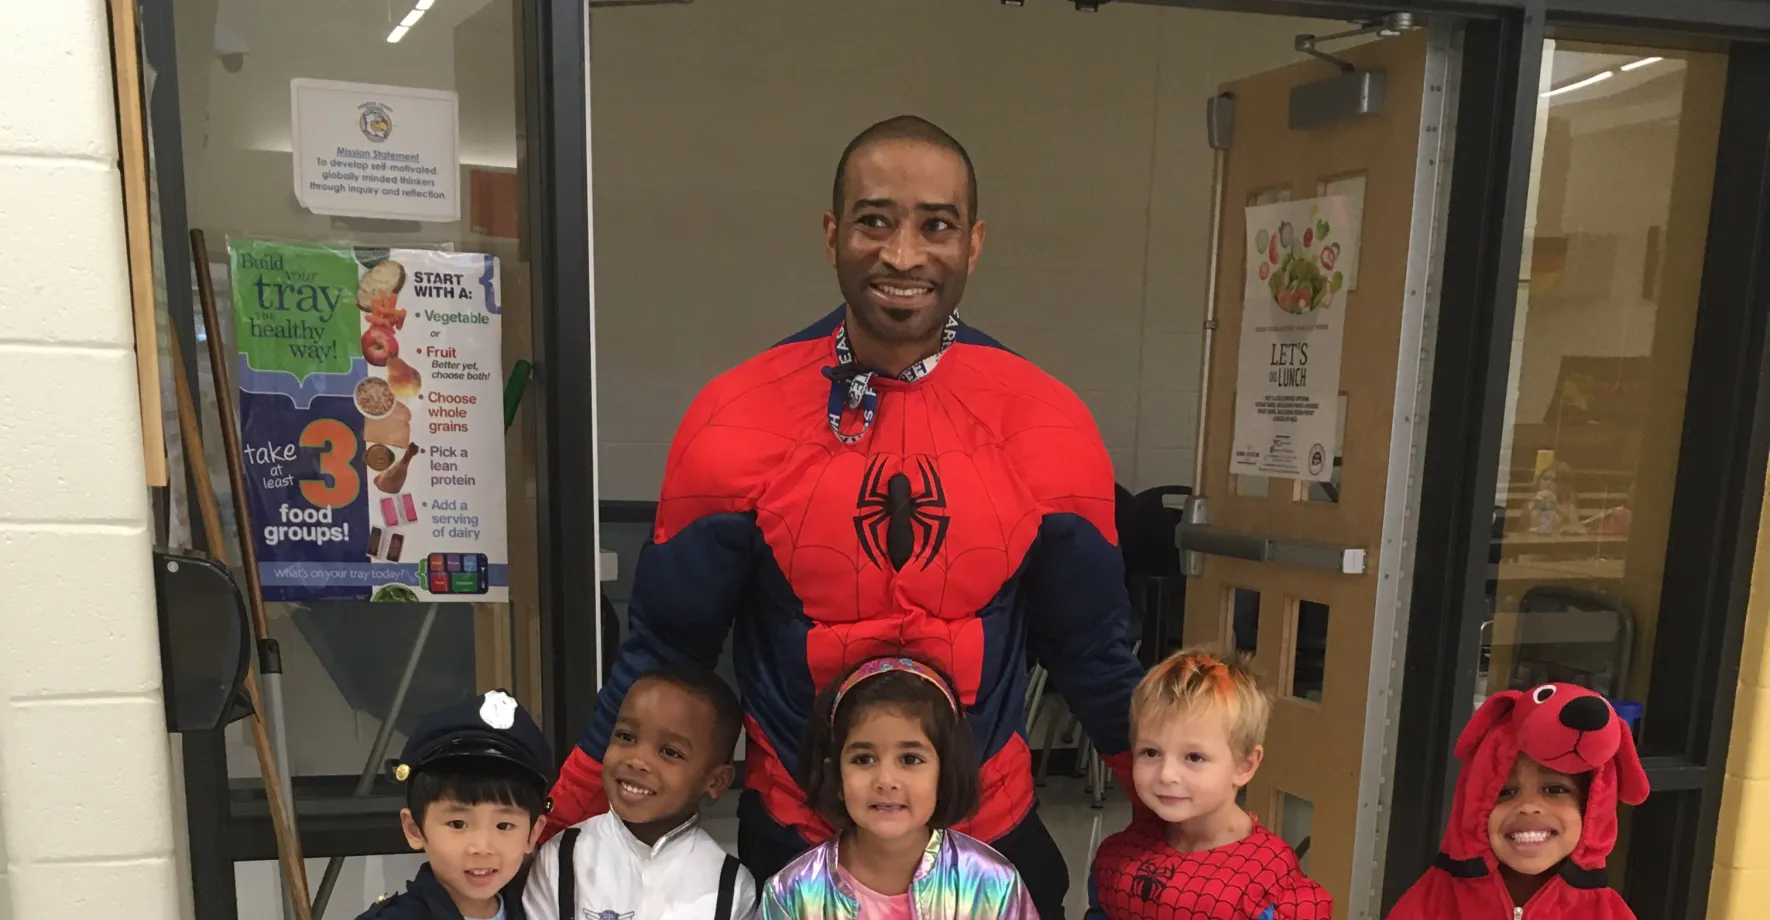 Chef reggie dressed a spiderman with little kids